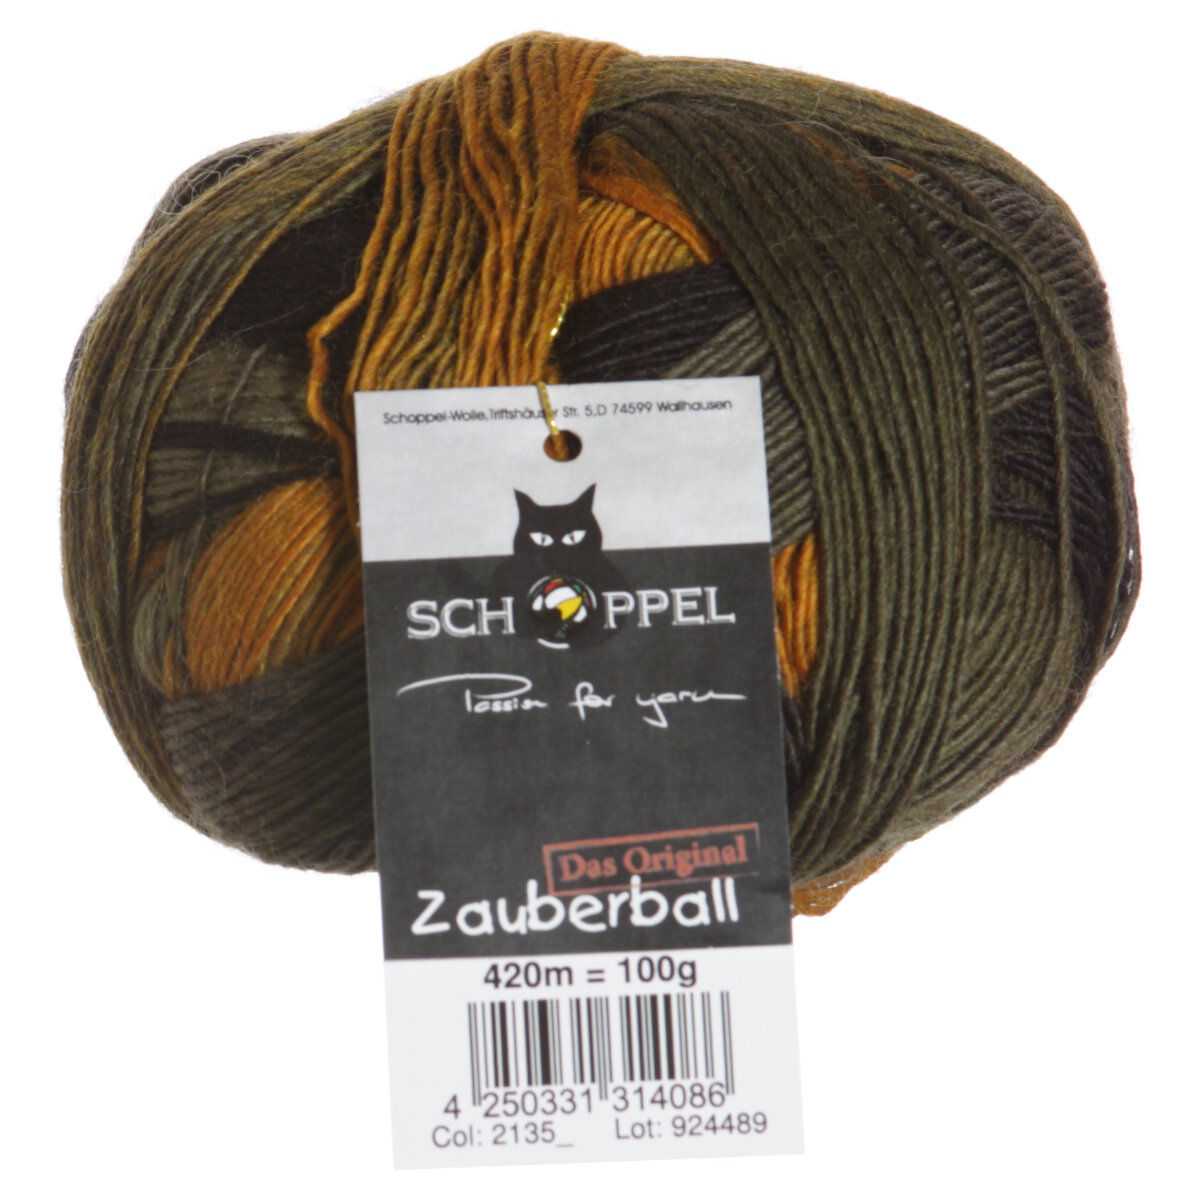 Schoppel Wolle Zauberball Yarn - 2135 (Discontinued) at Jimmy Beans Wool